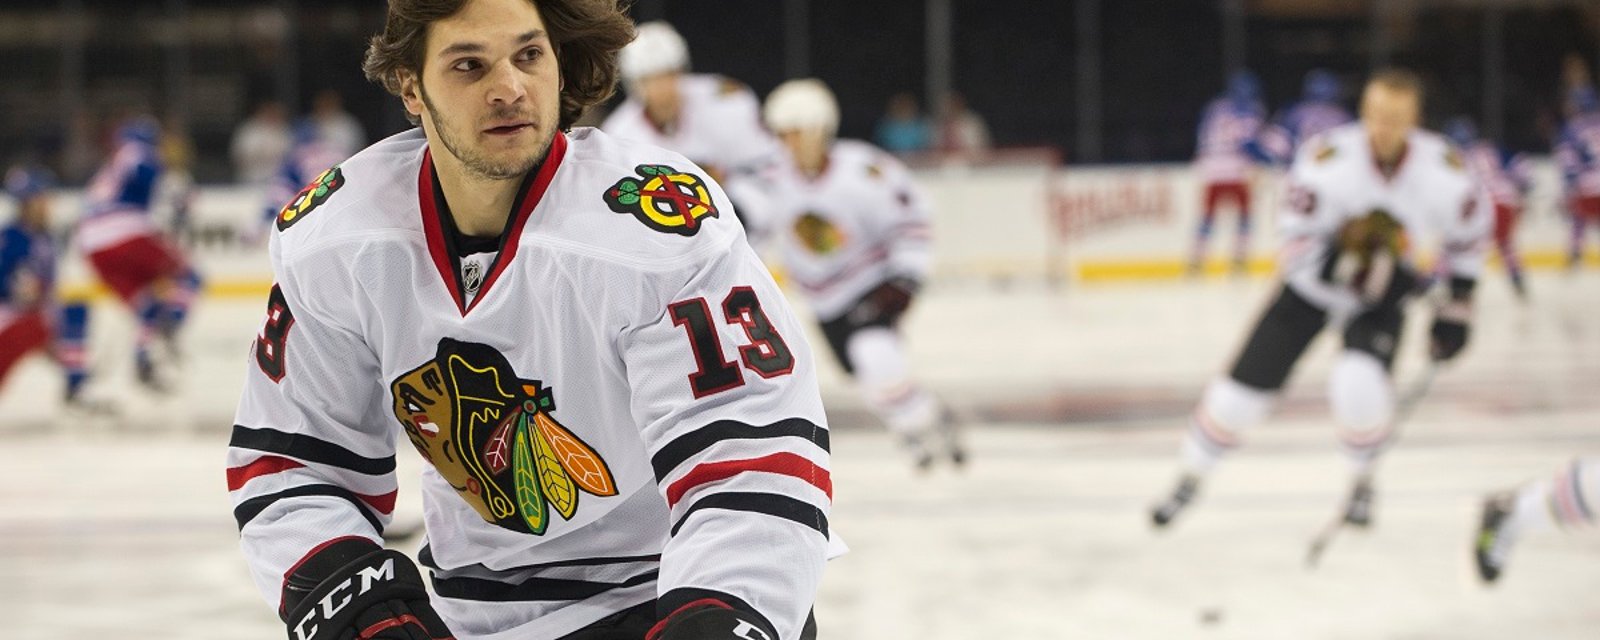 Daniel Carcillo responds to accusations made by Paul Bissonnette, but Biznasty buries him again.